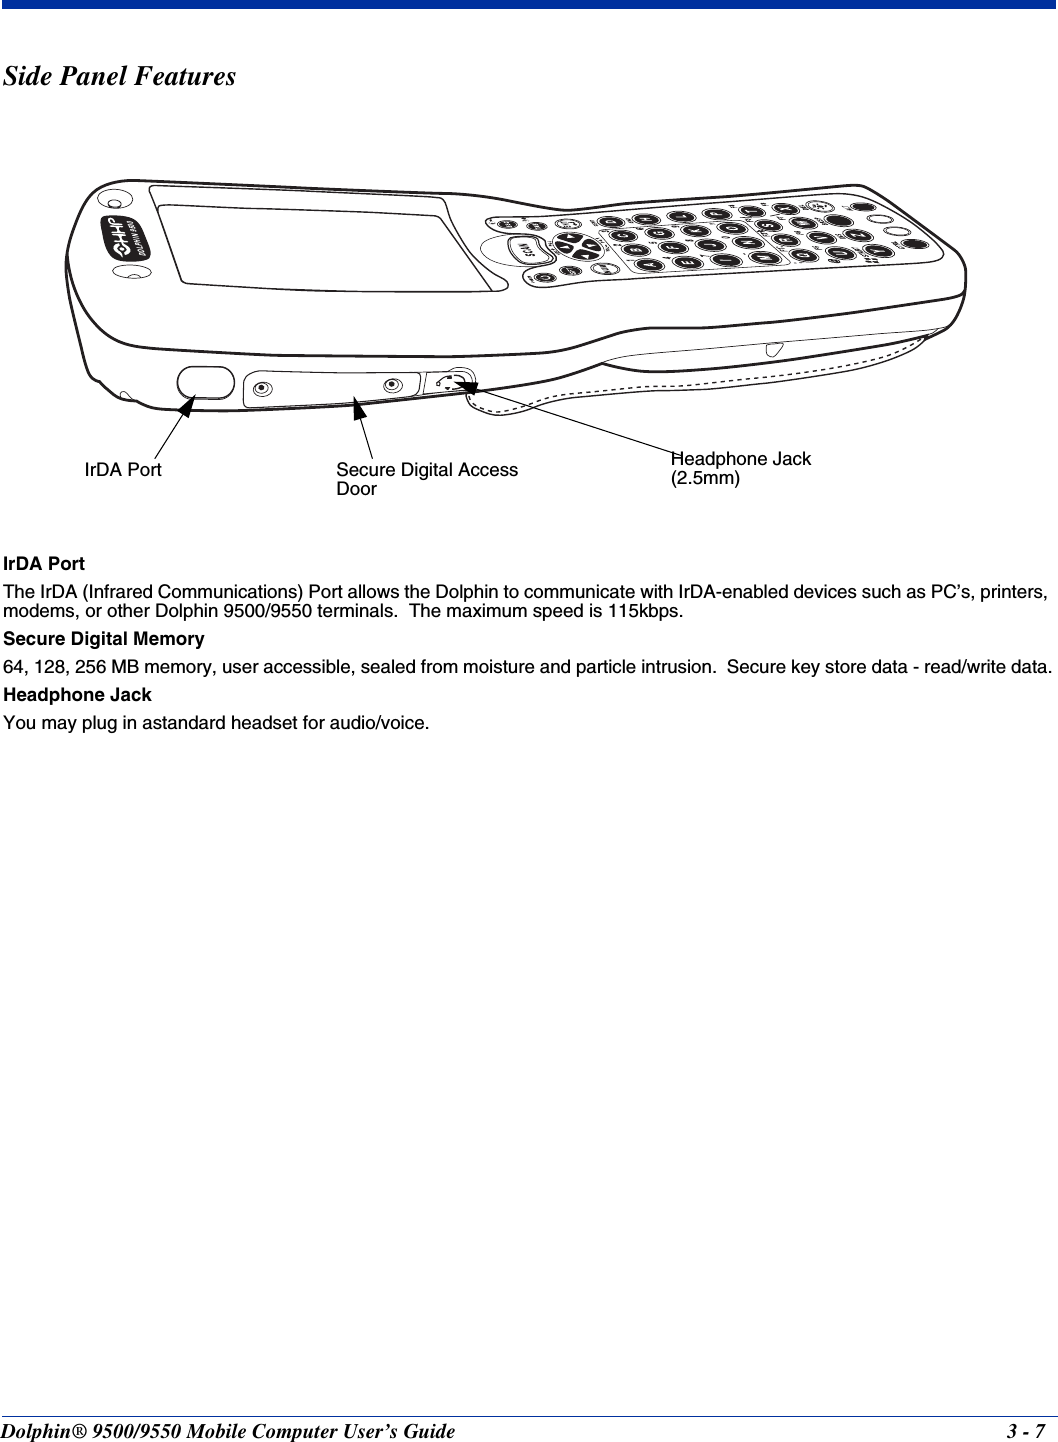 Dolphin® 9500/9550 Mobile Computer User’s Guide 3 - 7Side Panel FeaturesIrDA PortThe IrDA (Infrared Communications) Port allows the Dolphin to communicate with IrDA-enabled devices such as PC’s, printers, modems, or other Dolphin 9500/9550 terminals.  The maximum speed is 115kbps.Secure Digital Memory64, 128, 256 MB memory, user accessible, sealed from moisture and particle intrusion.  Secure key store data - read/write data.Headphone JackYou may plug in astandard headset for audio/voice.DOLPHIN 9500IrDA Port Secure Digital Access DoorHeadphone Jack  (2.5mm)